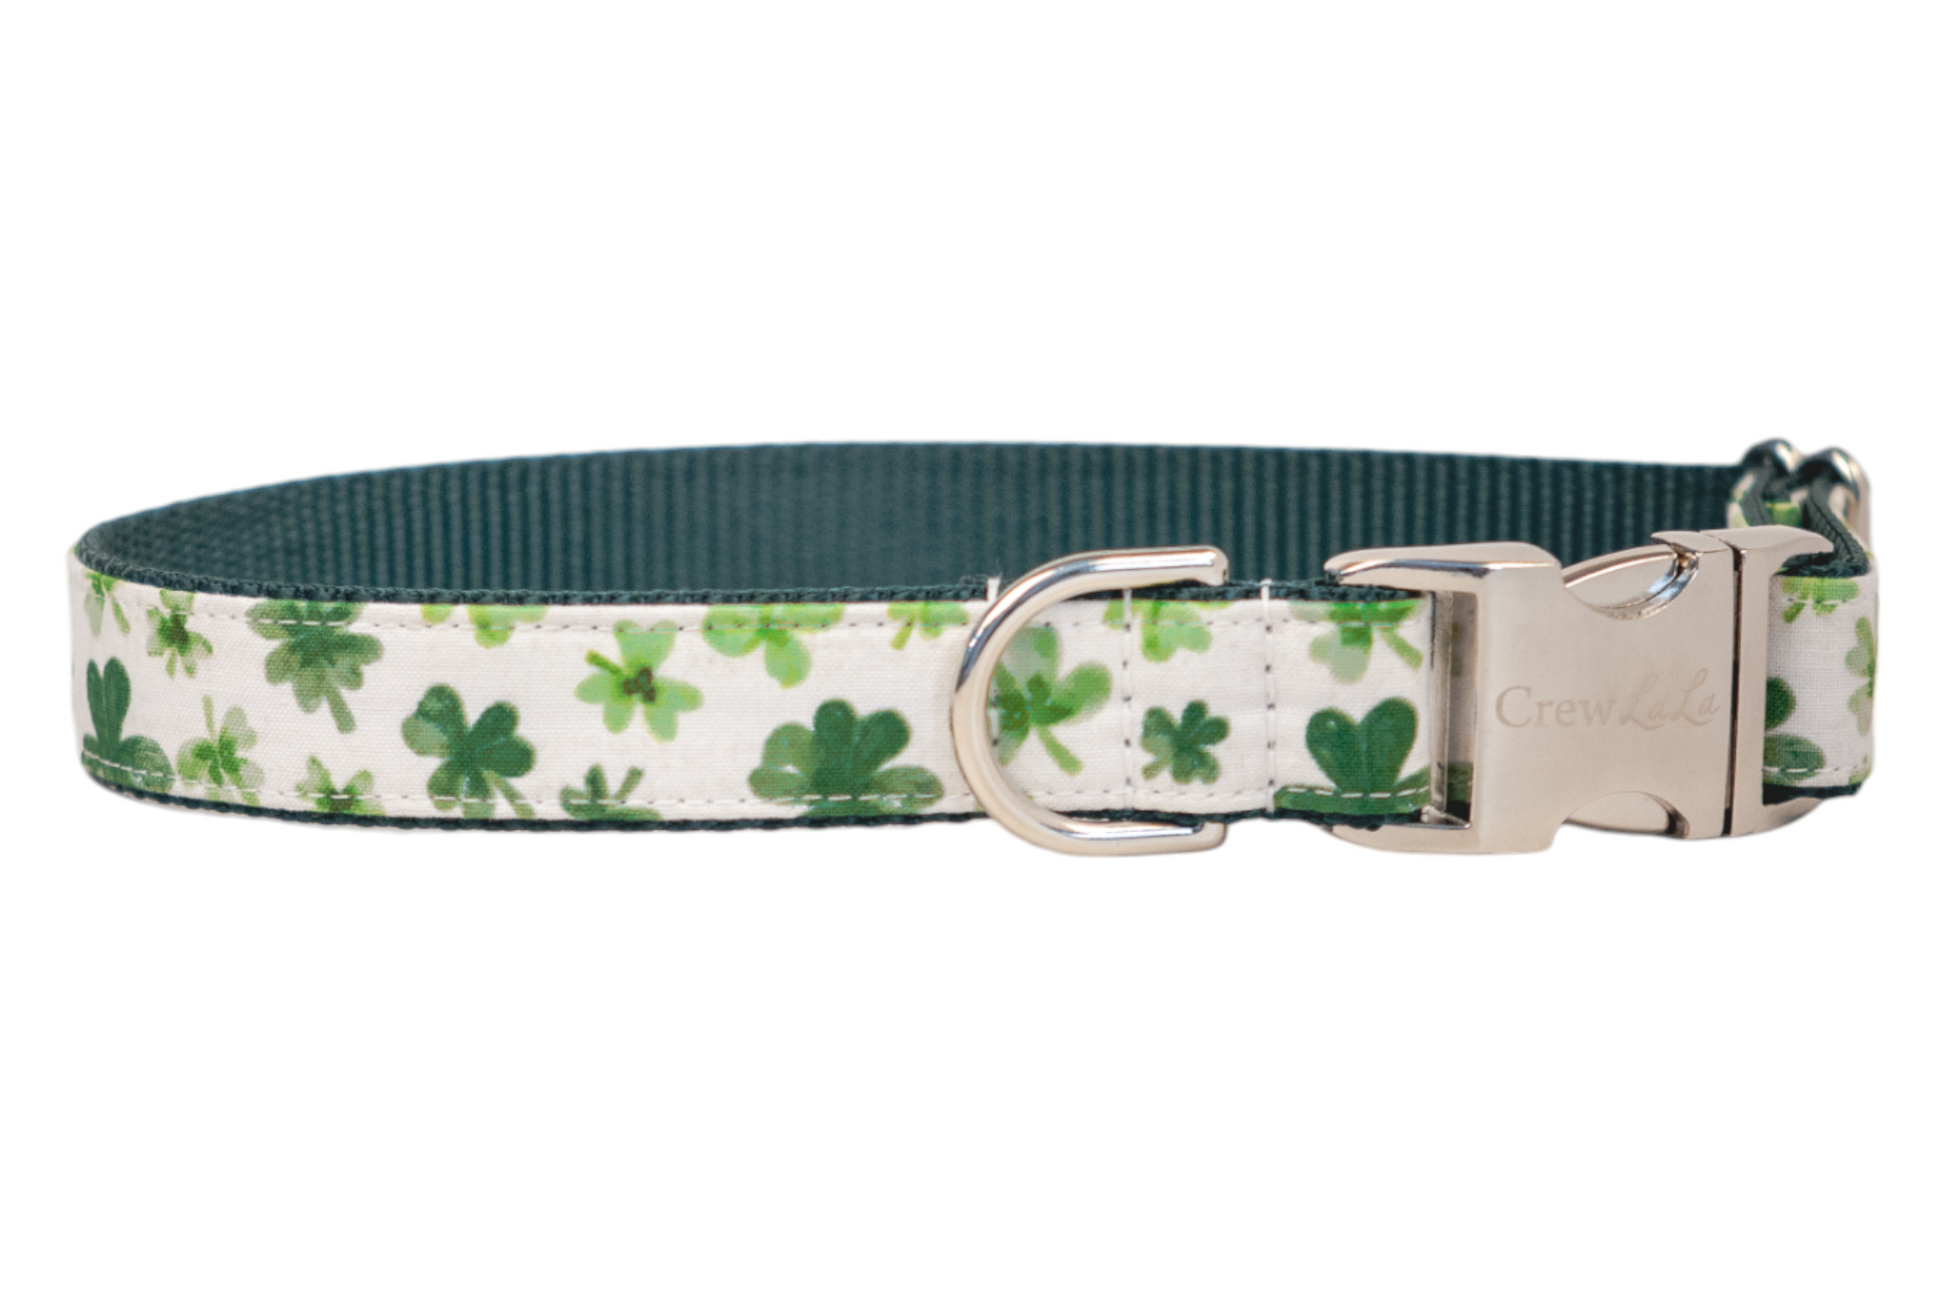 Paddy Party Belle Bow Collar - Crew LaLa